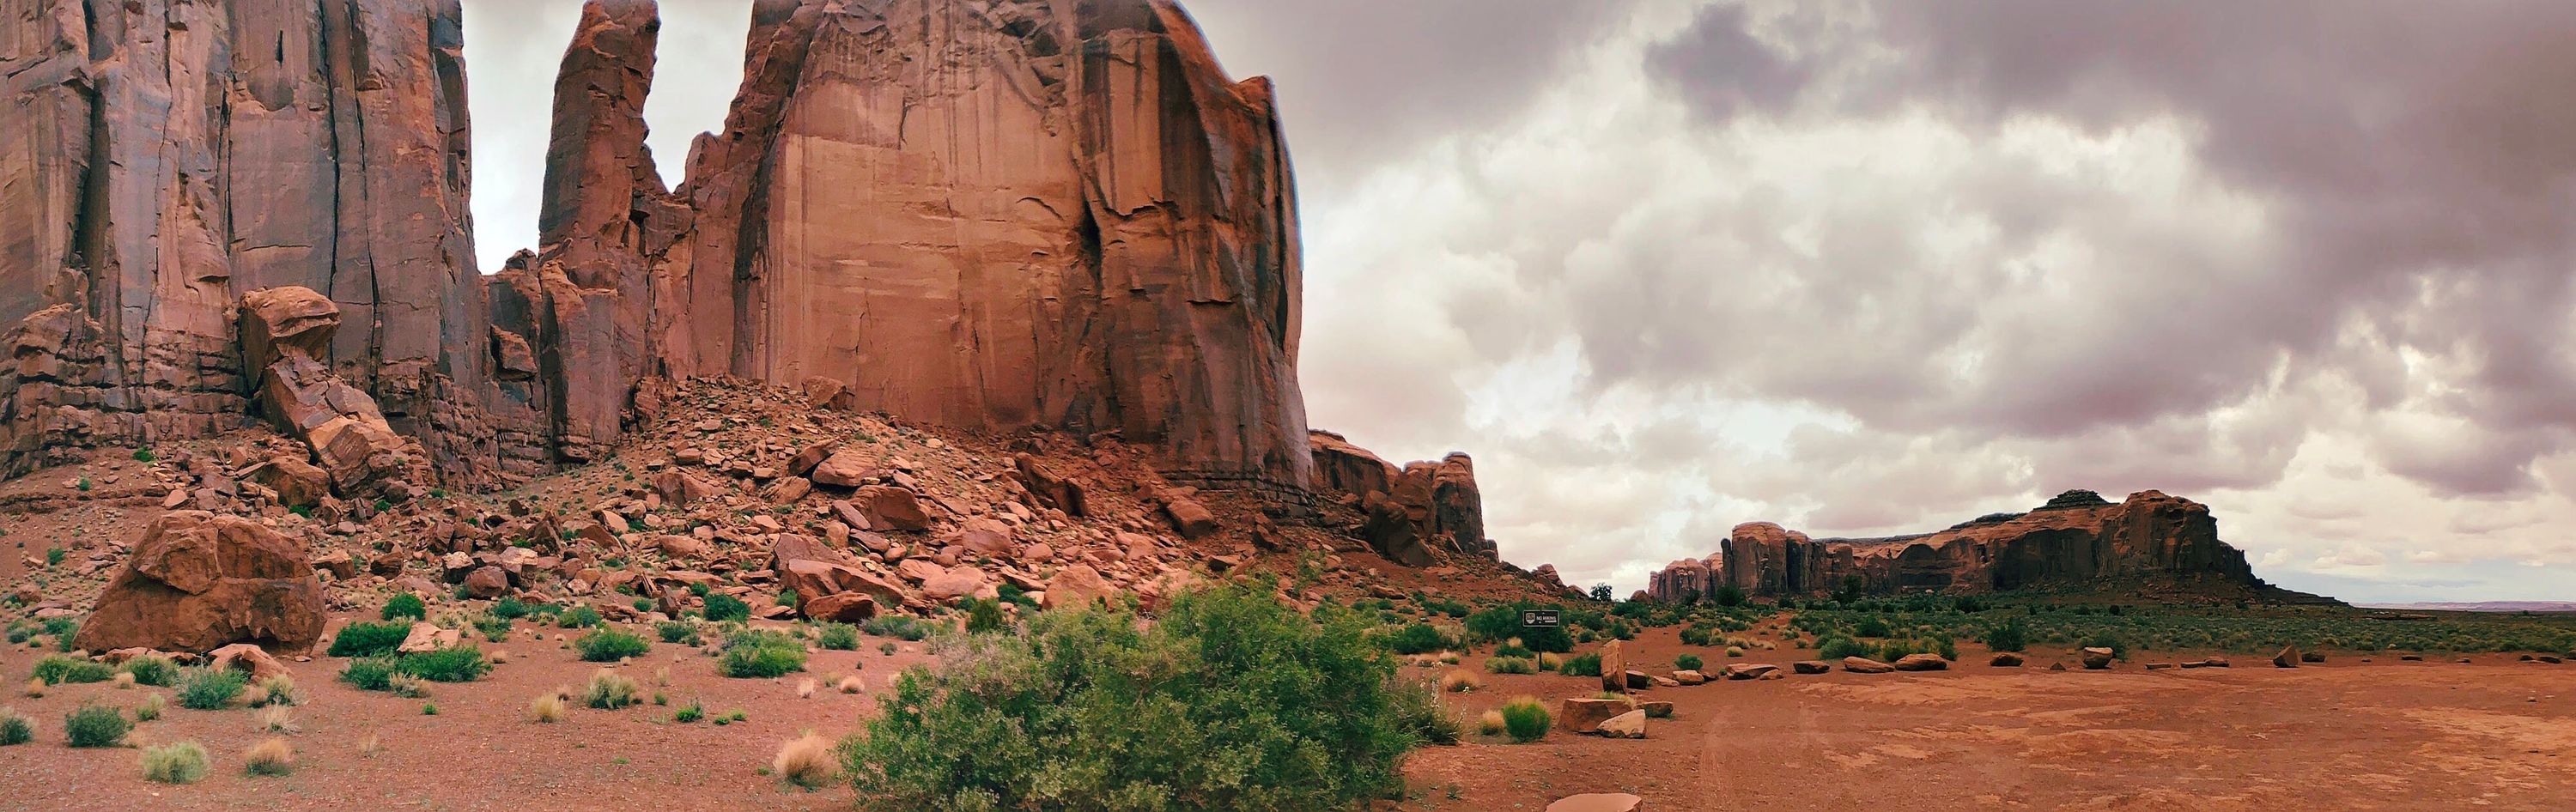 Panoramic view of The Thumb, Monument Valley